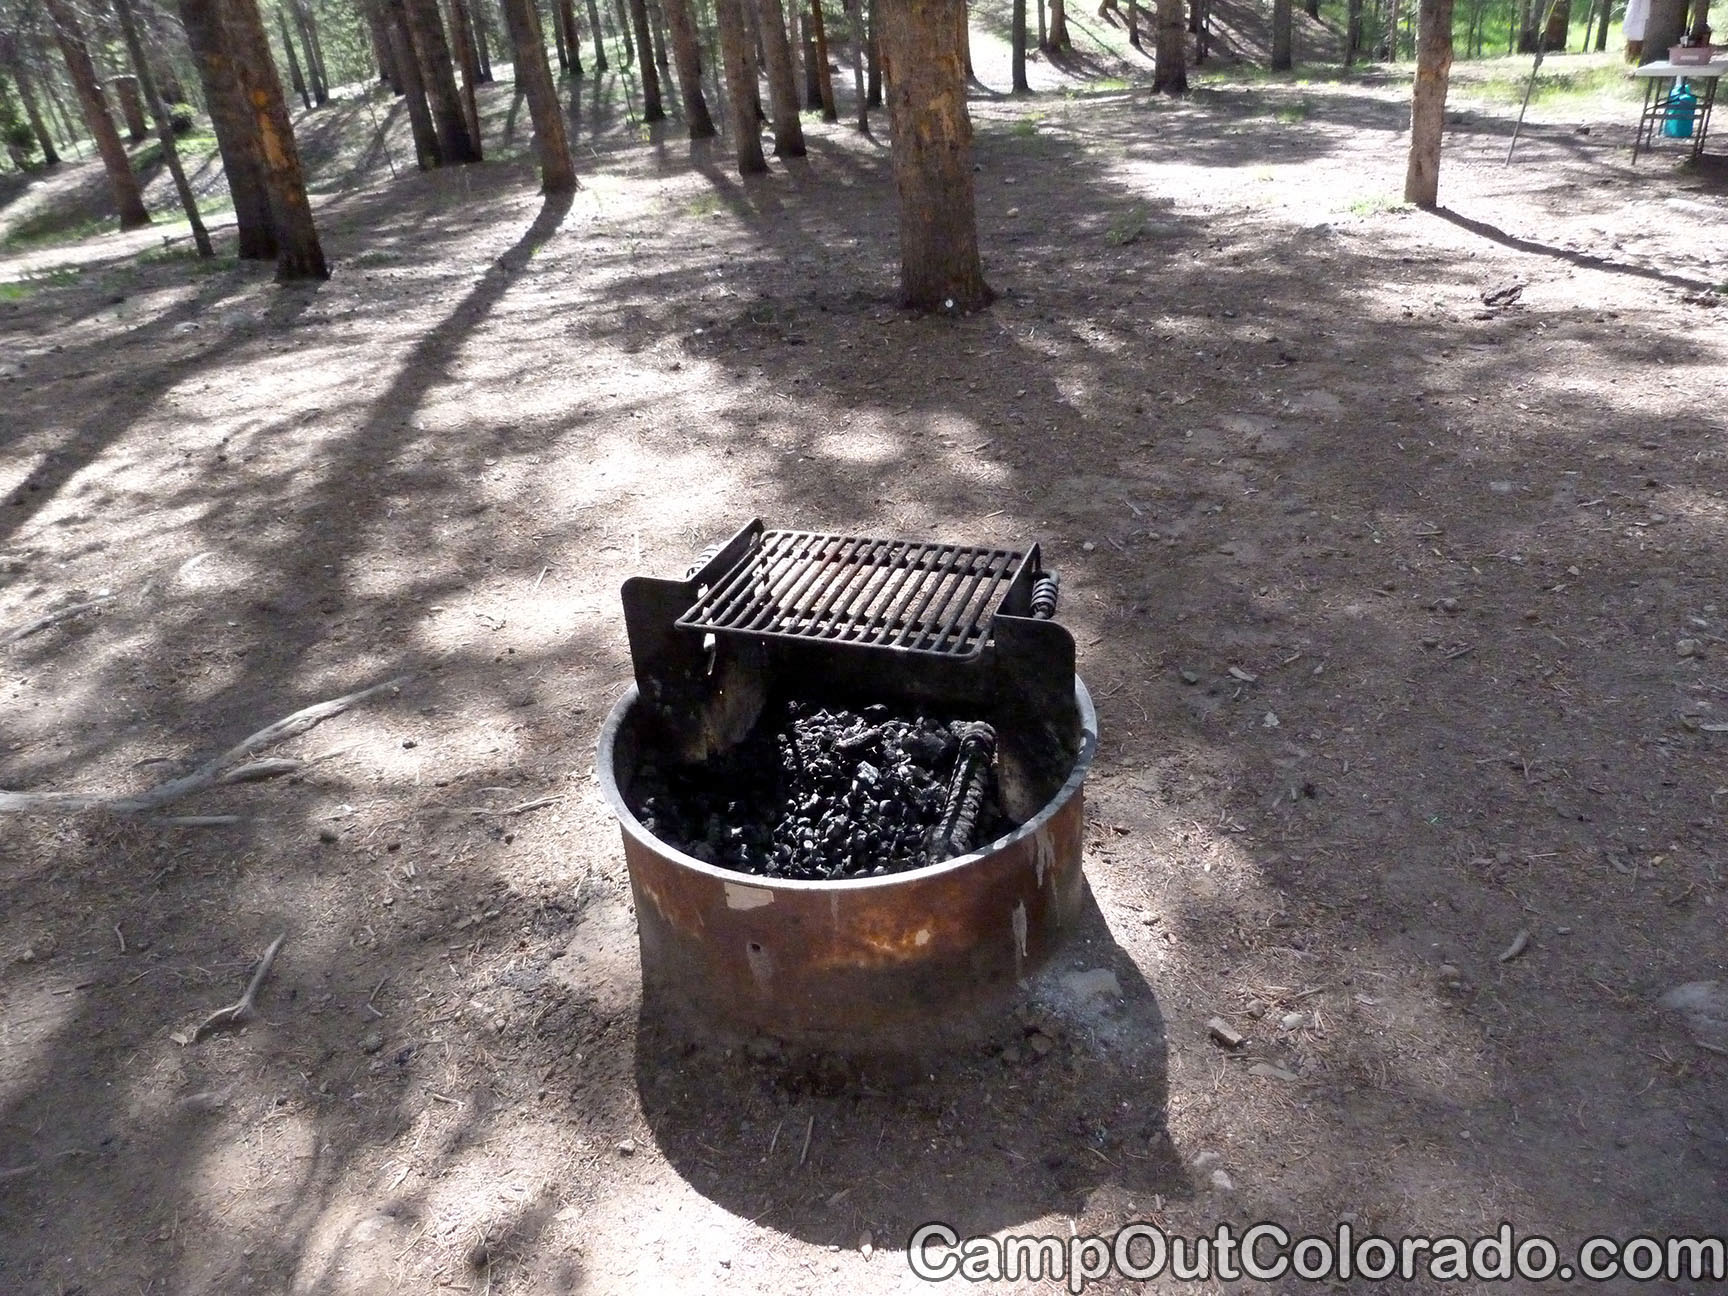 Camp-out-colorado-silver-dollar-turquoise-firepit